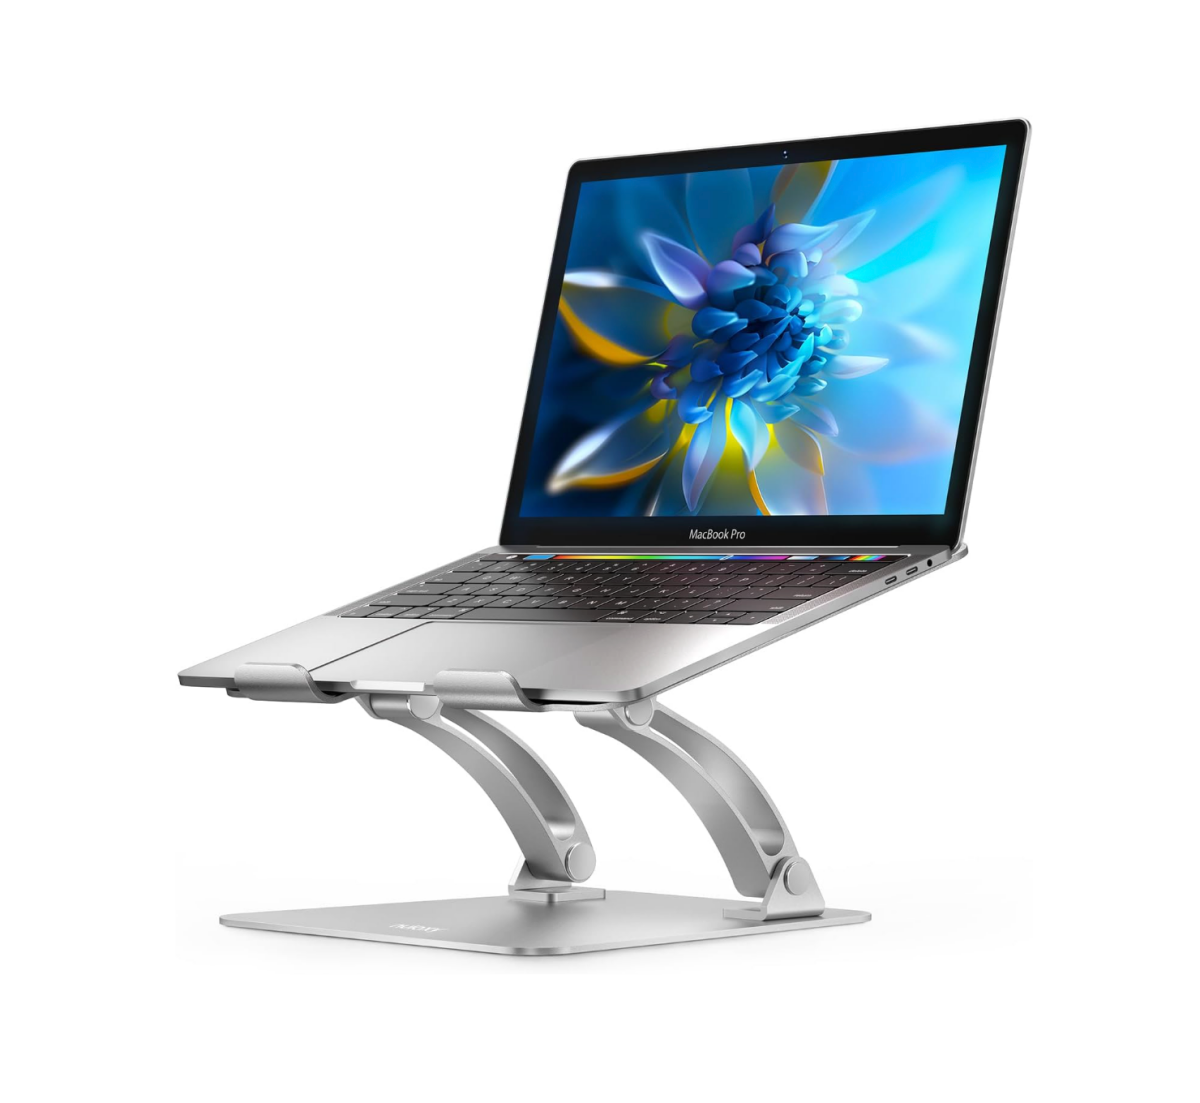 A Nulaxy C1 adjustable laptop stand